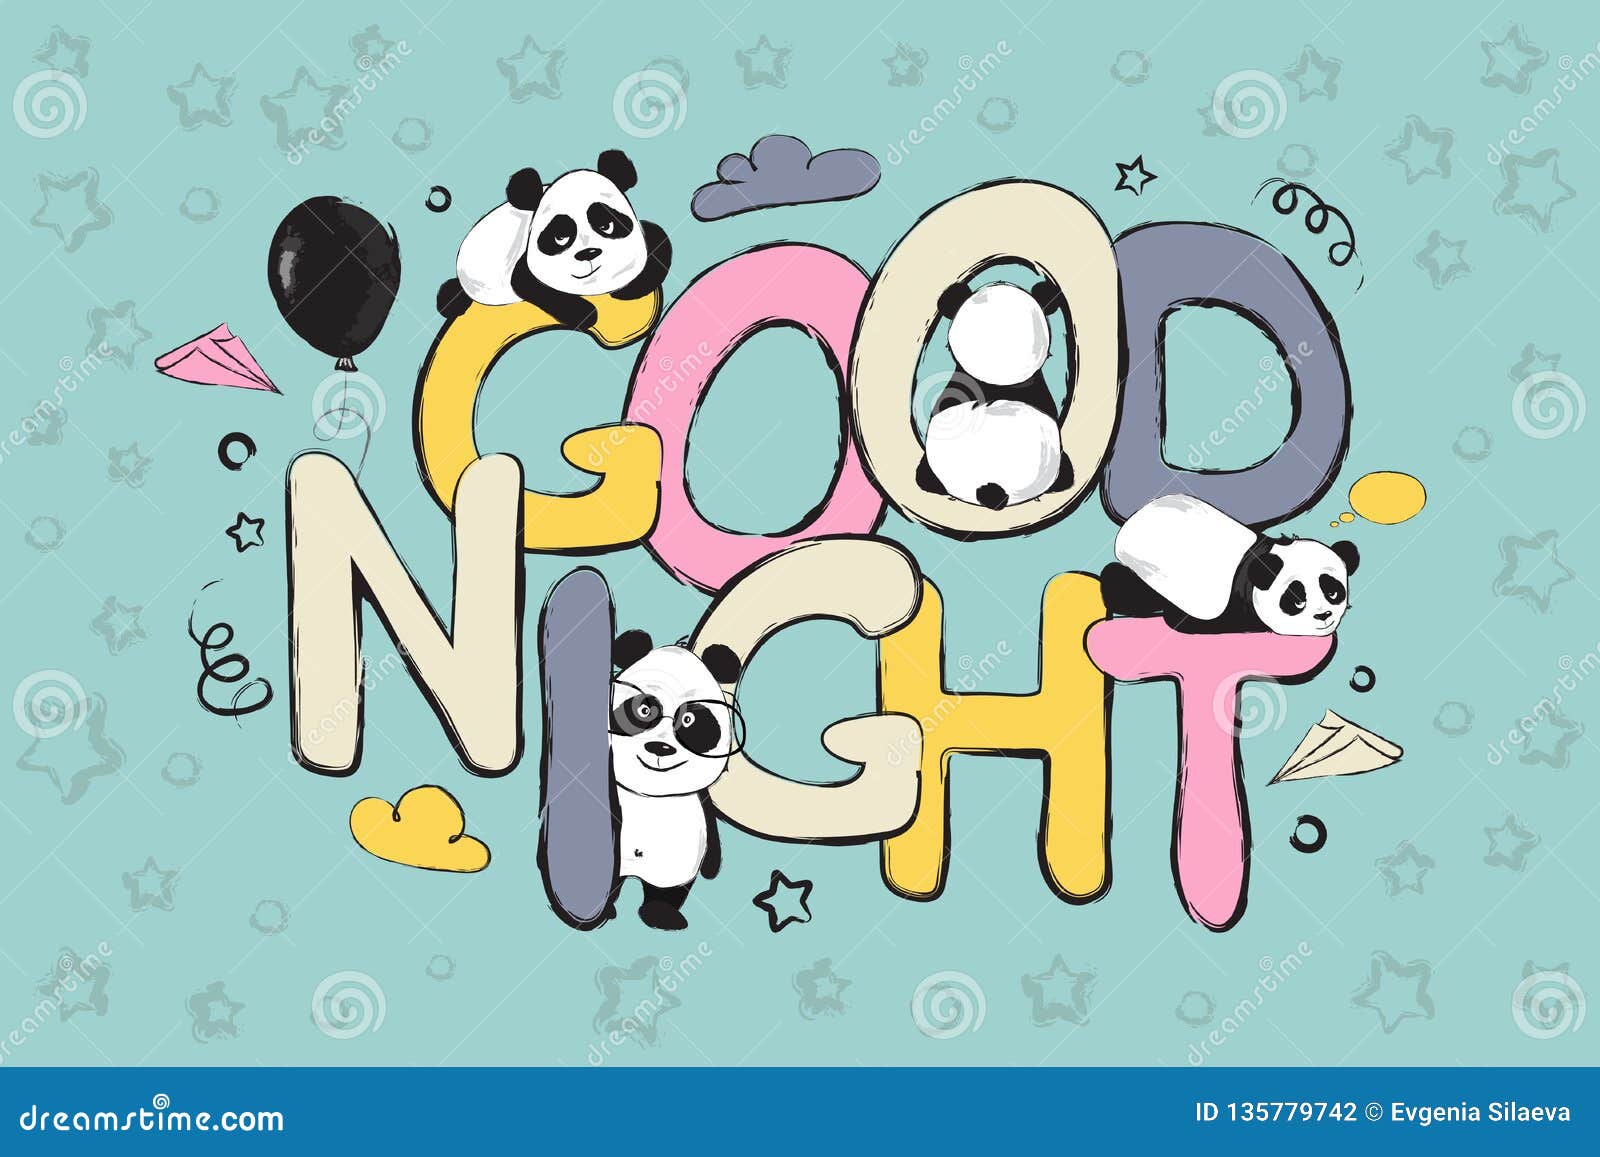 Good Night Greeting Card Design with Cute Panda Bears and Quote ...